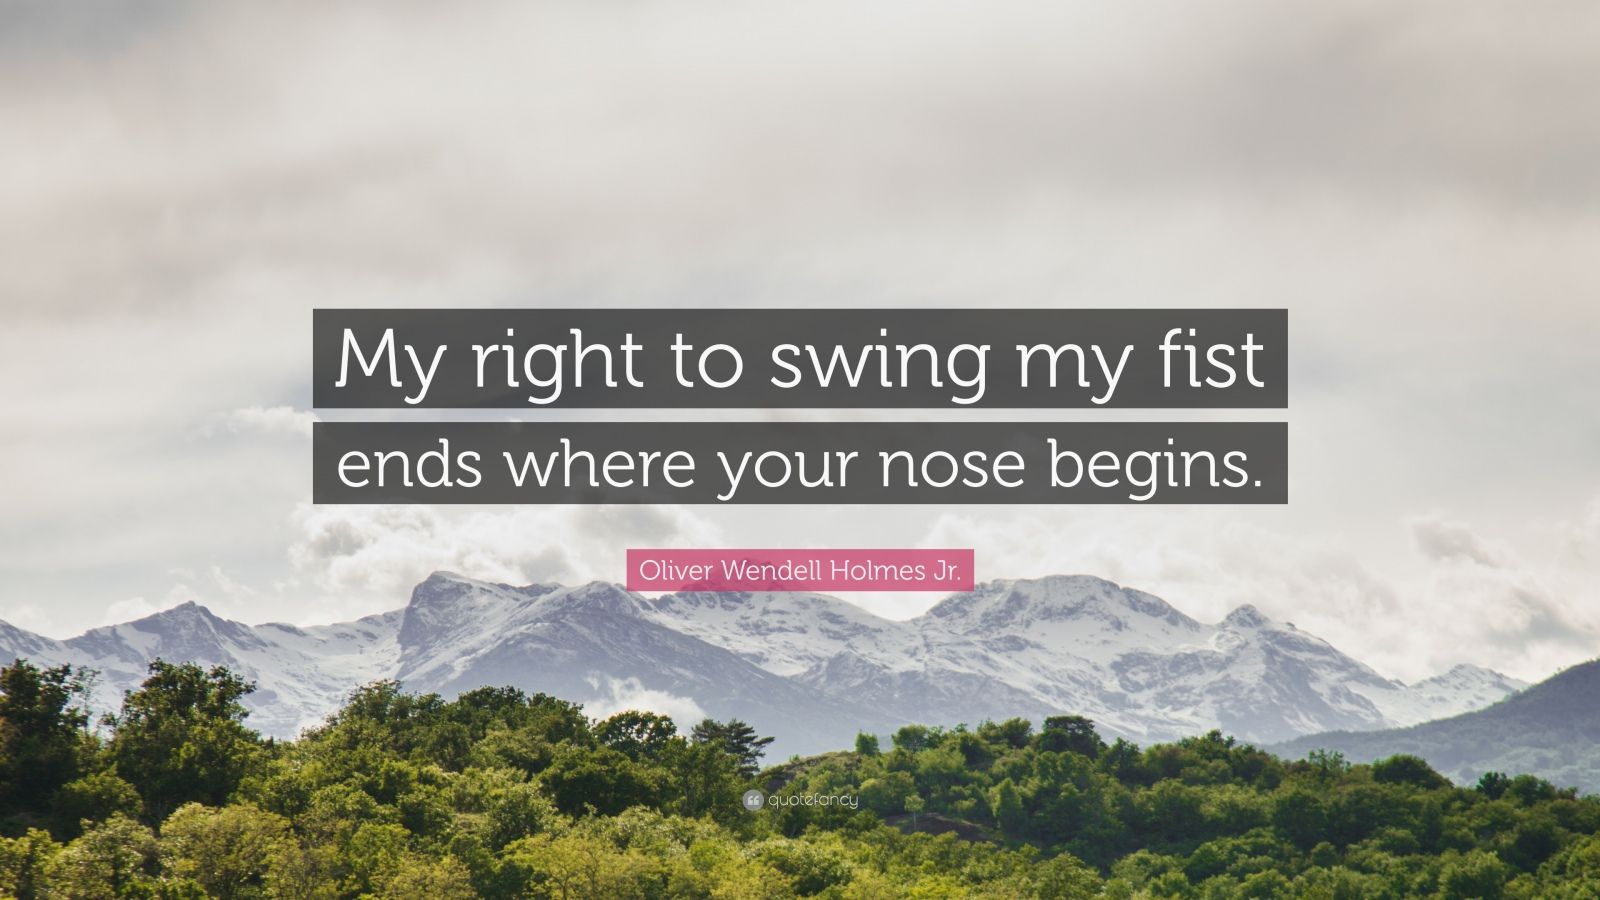 your freedom to swing your fist